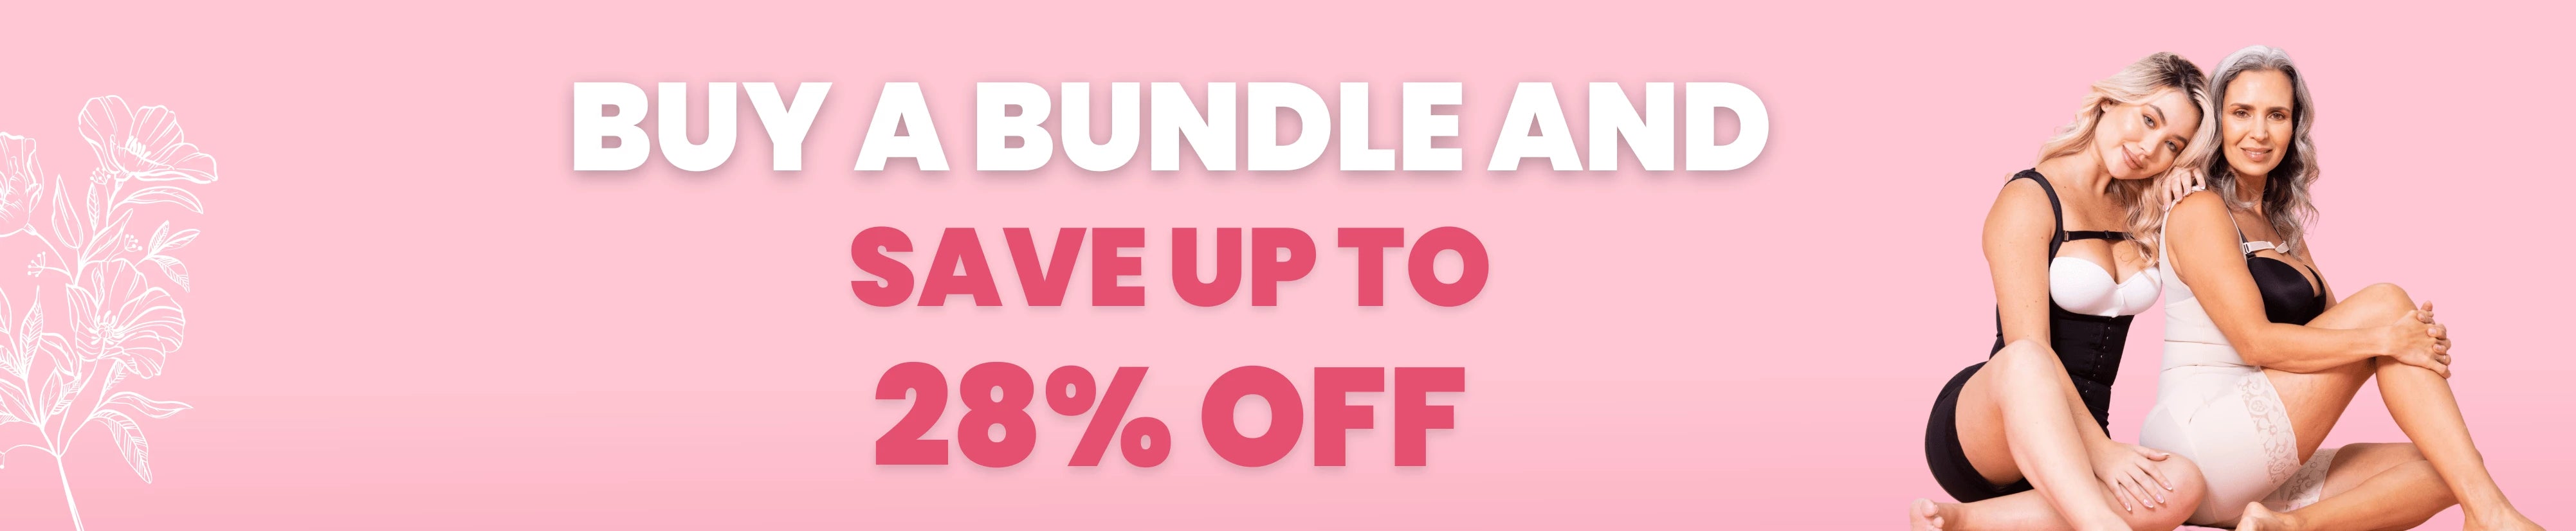 Buy a bundle and save up to 28% off